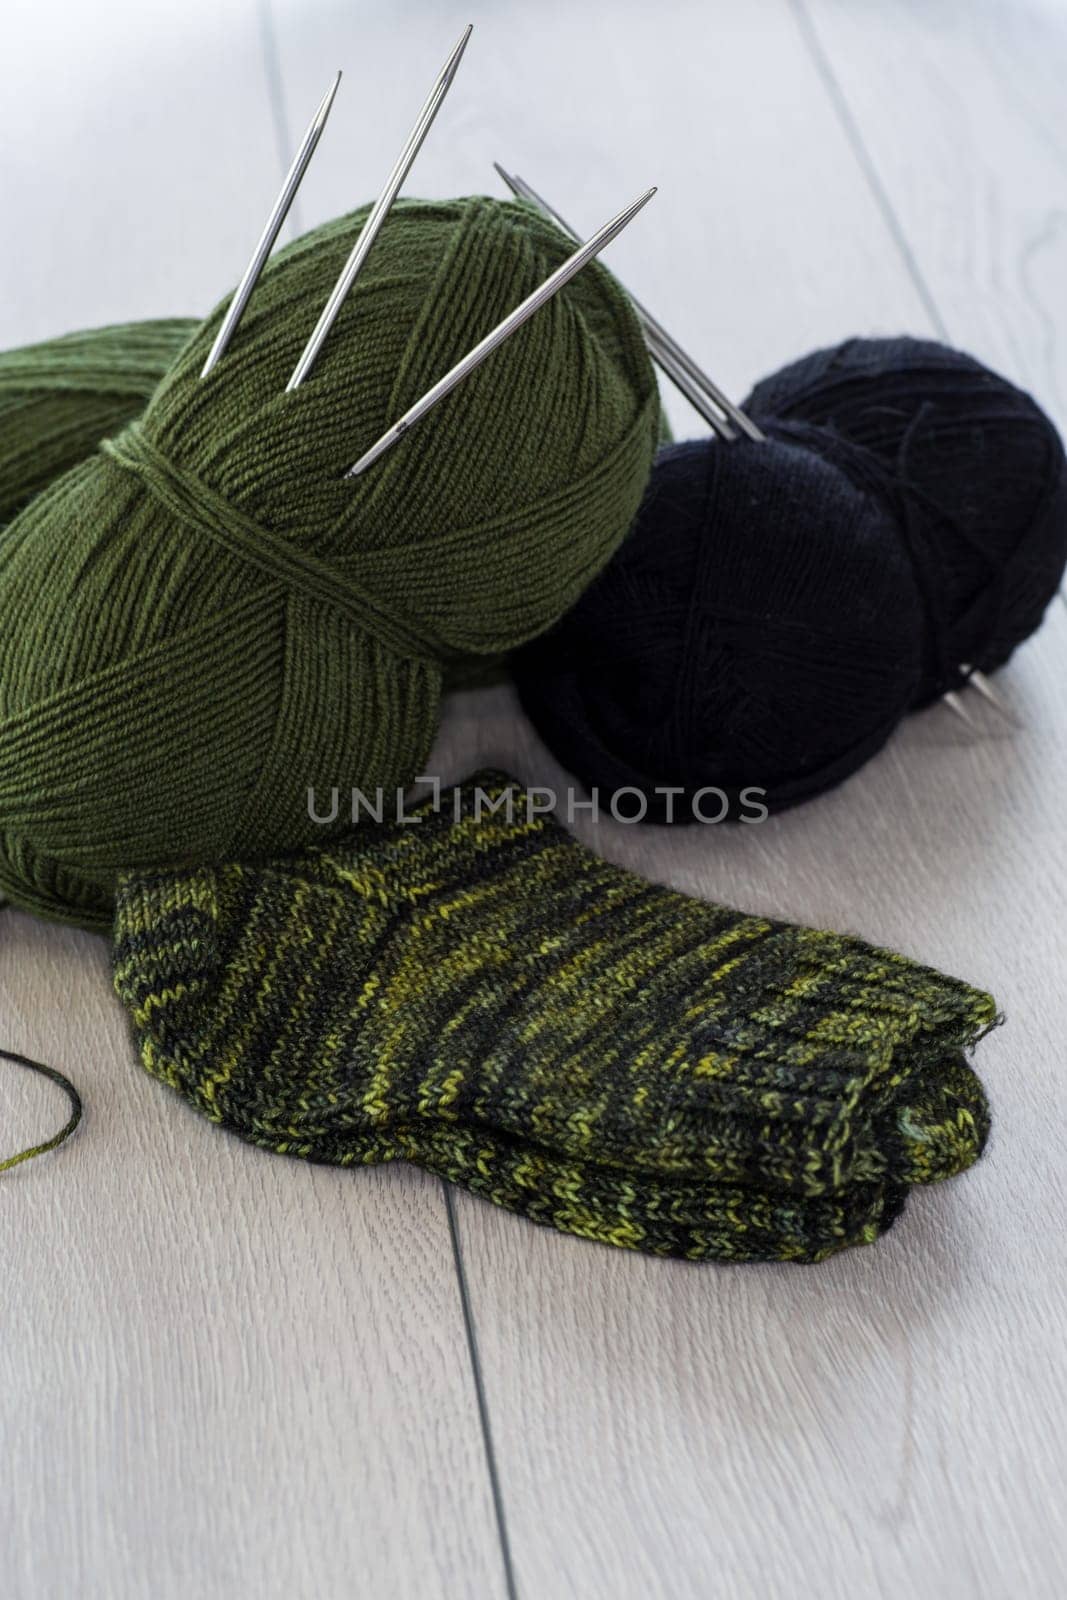 wool yarn, knitting needles and other tools for hand knitting. by Rawlik